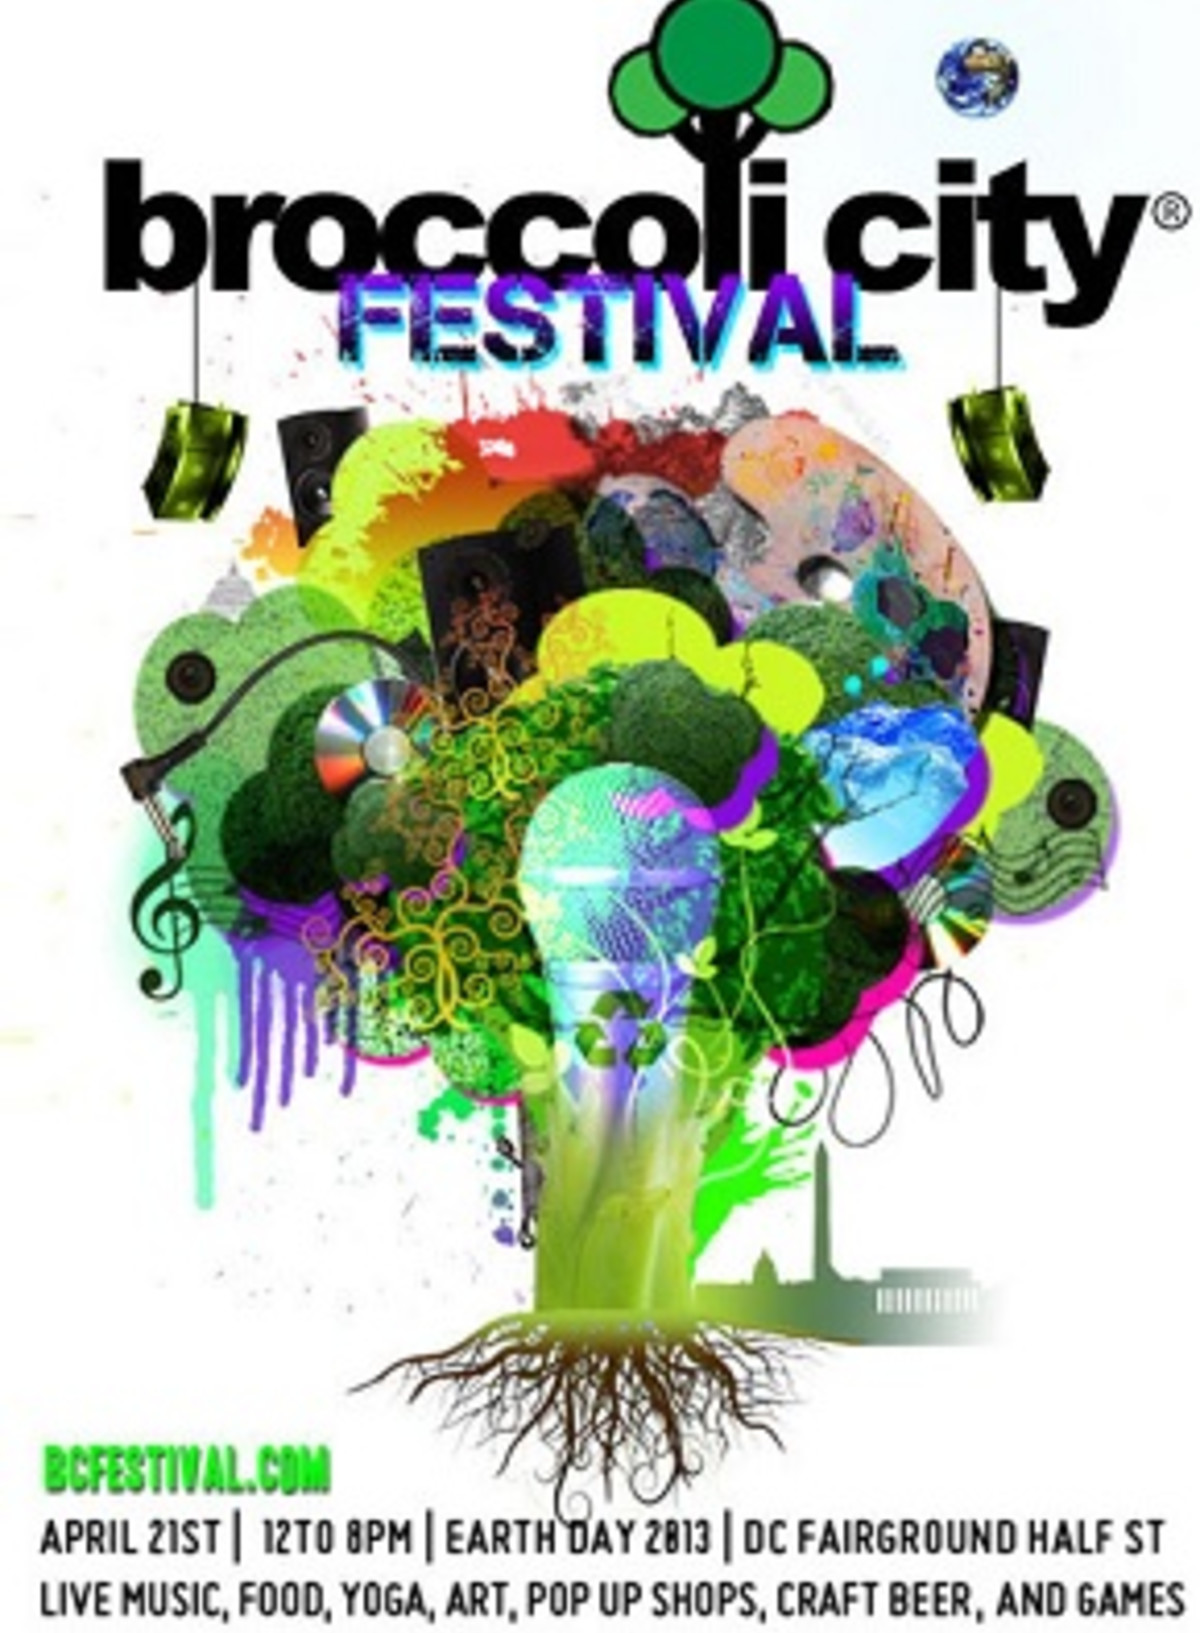 Broccoli City Festival Will Make D.C. “Green” with Earth Day